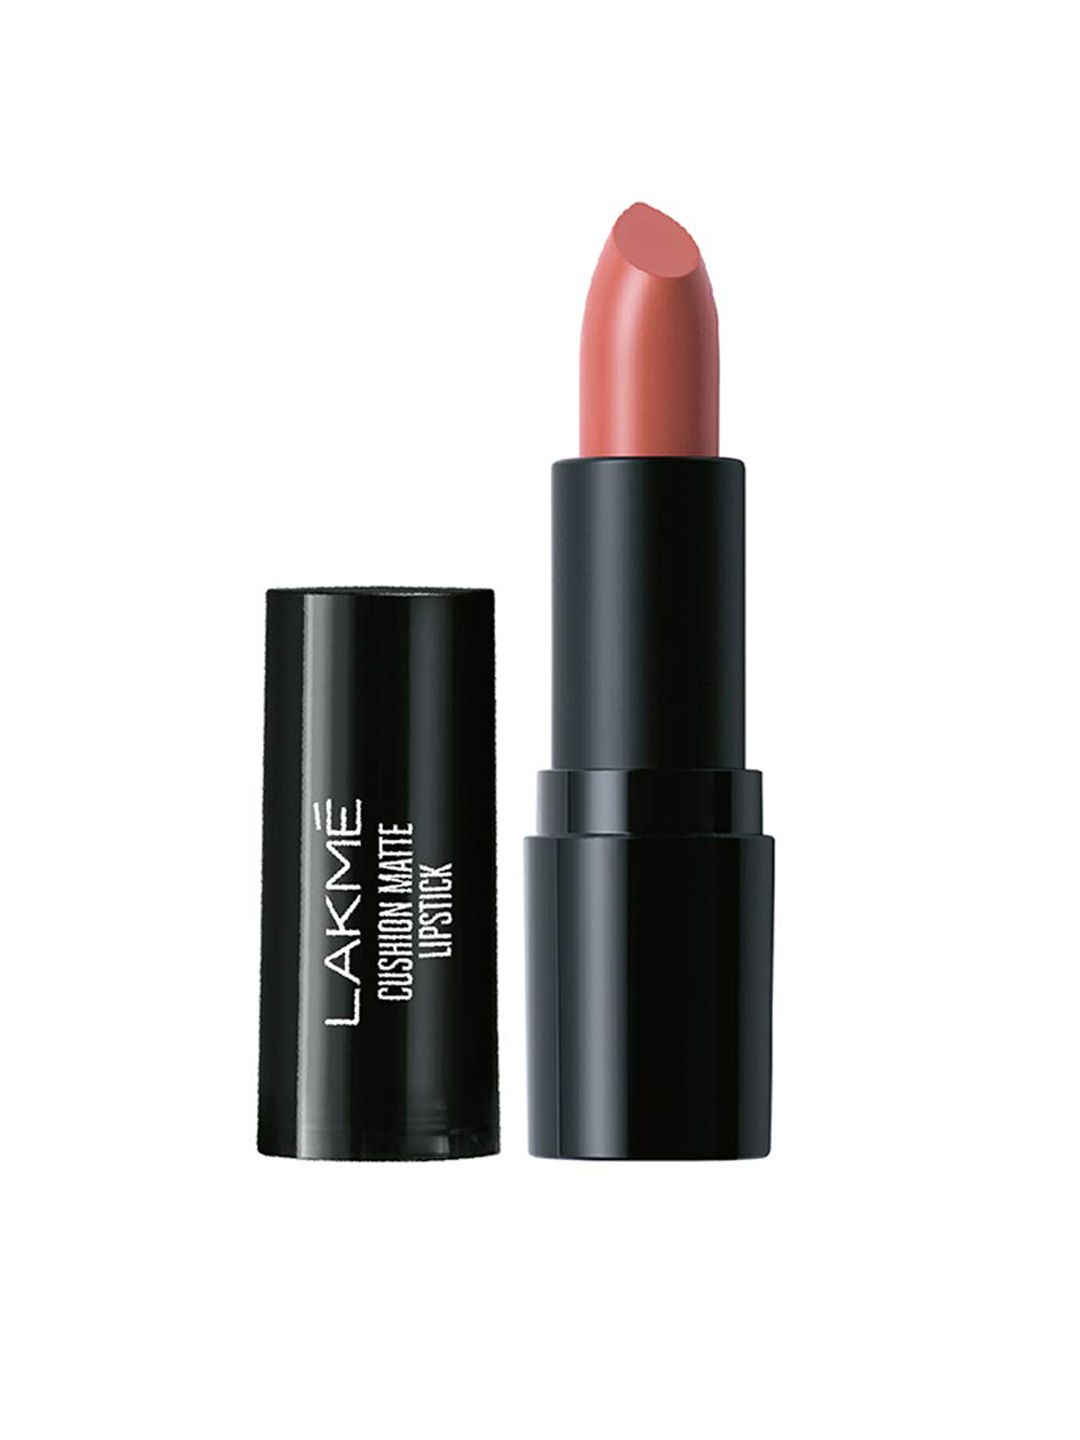 Lakme Cushion Matte Lipstick with French Rose Oil - Pink Blush Price in India